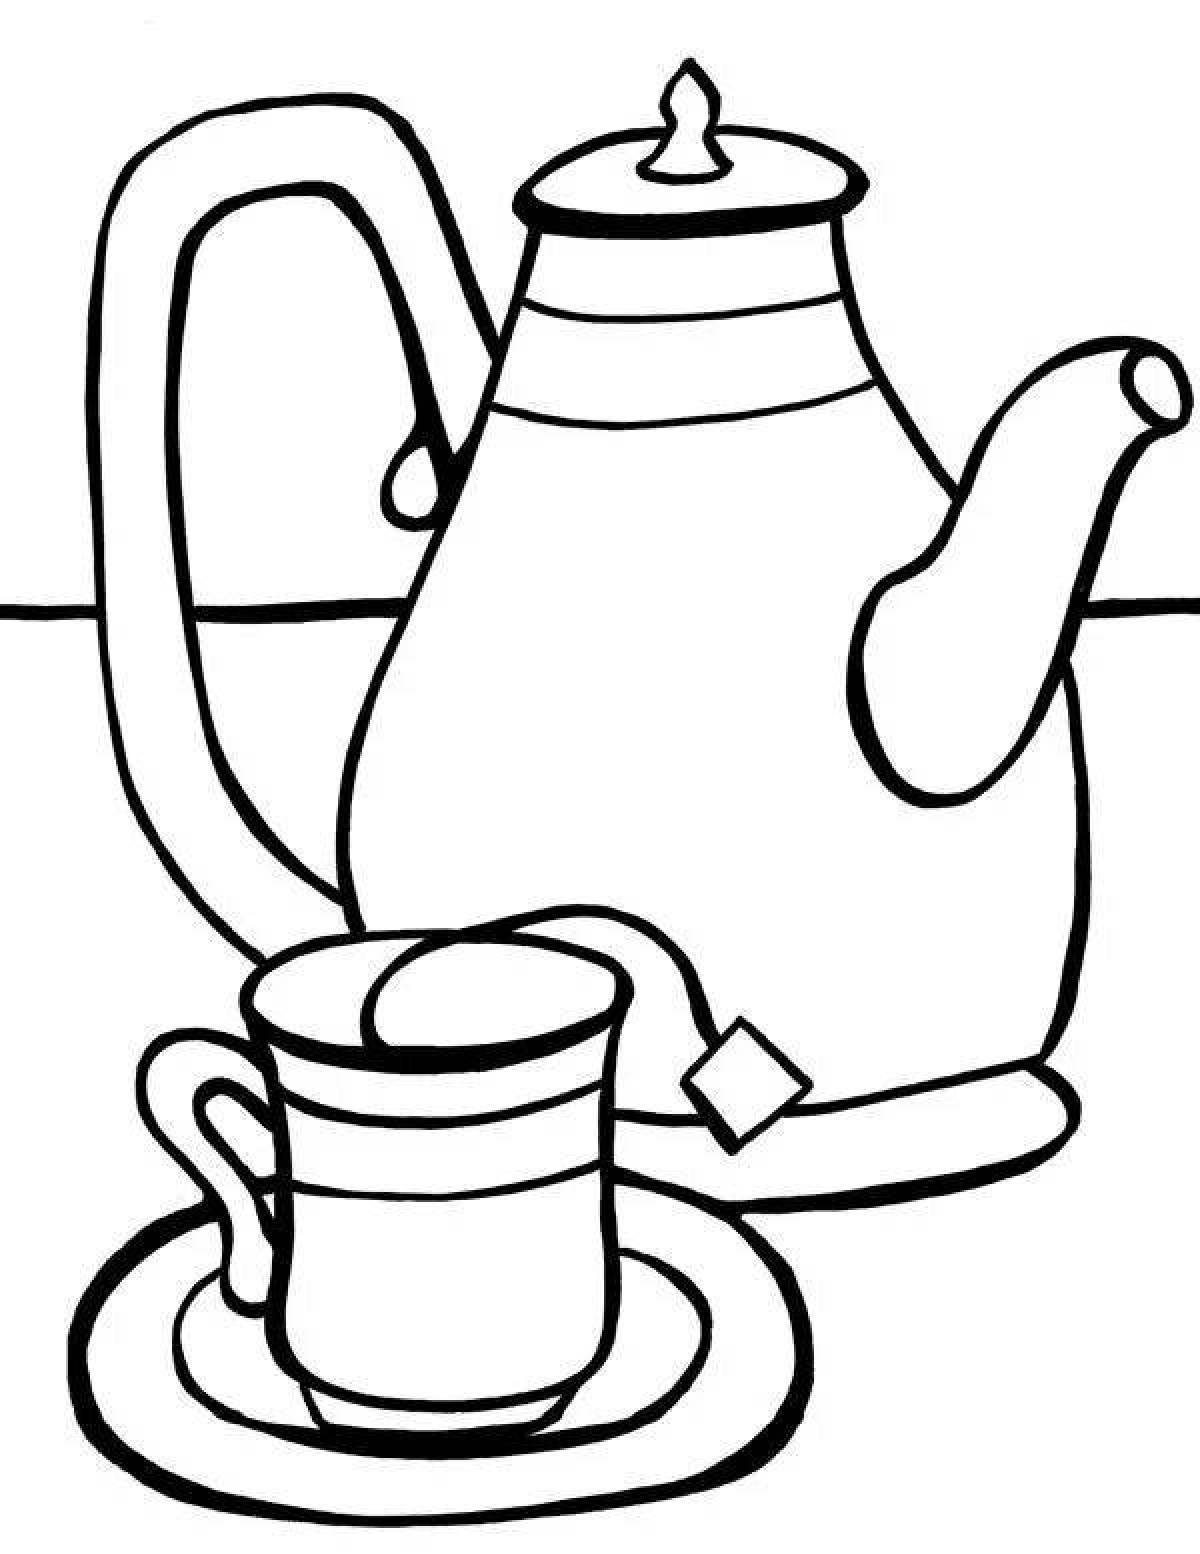 Coloring book shining teapot and cup